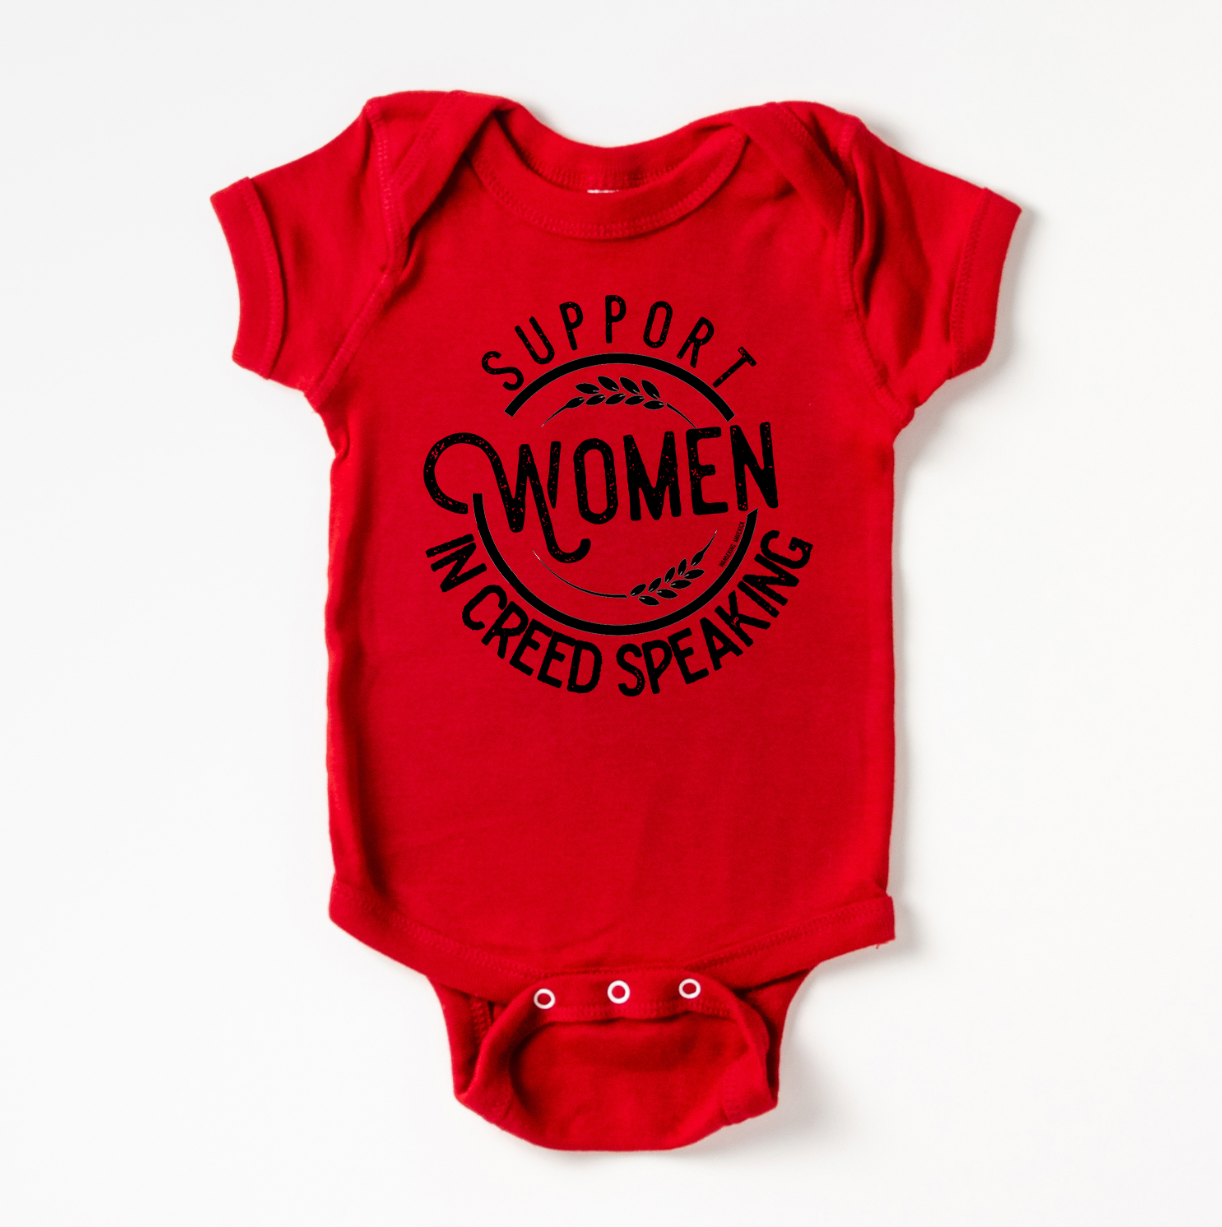 Support Women In Creed Speaking One Piece/T-Shirt (Newborn - Youth XL) - Multiple Colors!